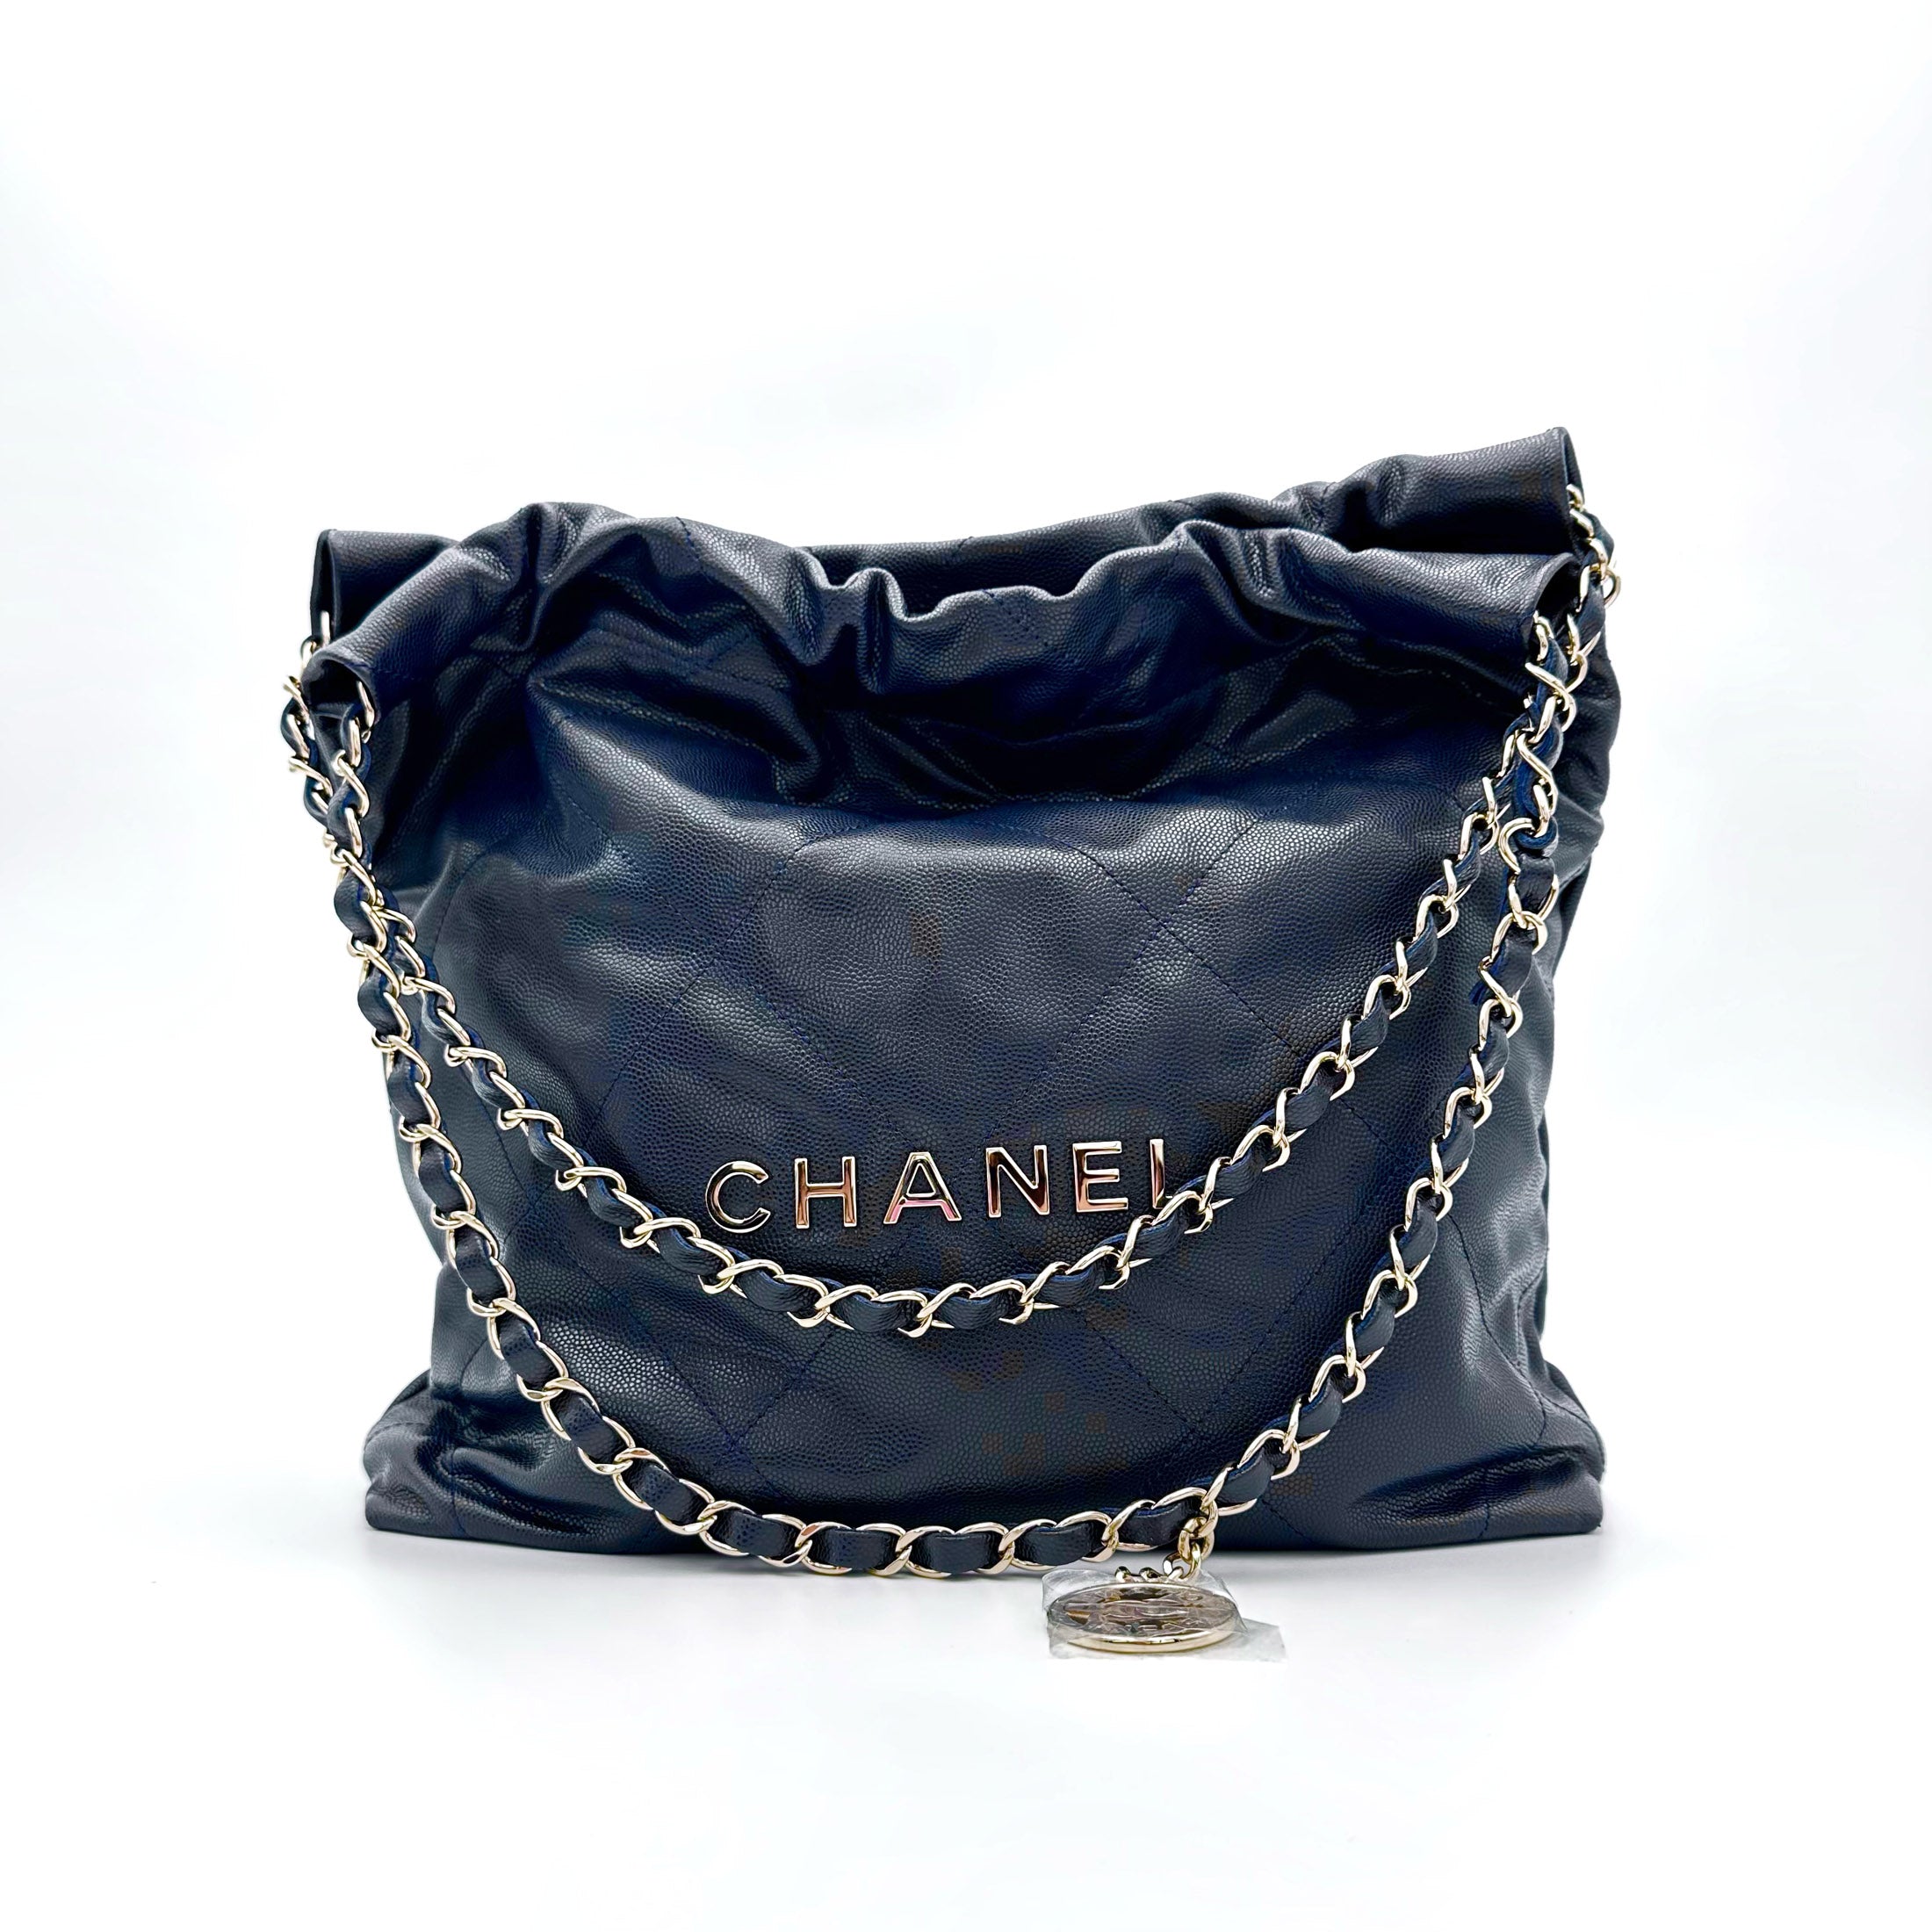 Chanel 22 Small (Navy, GHW) - Brand New